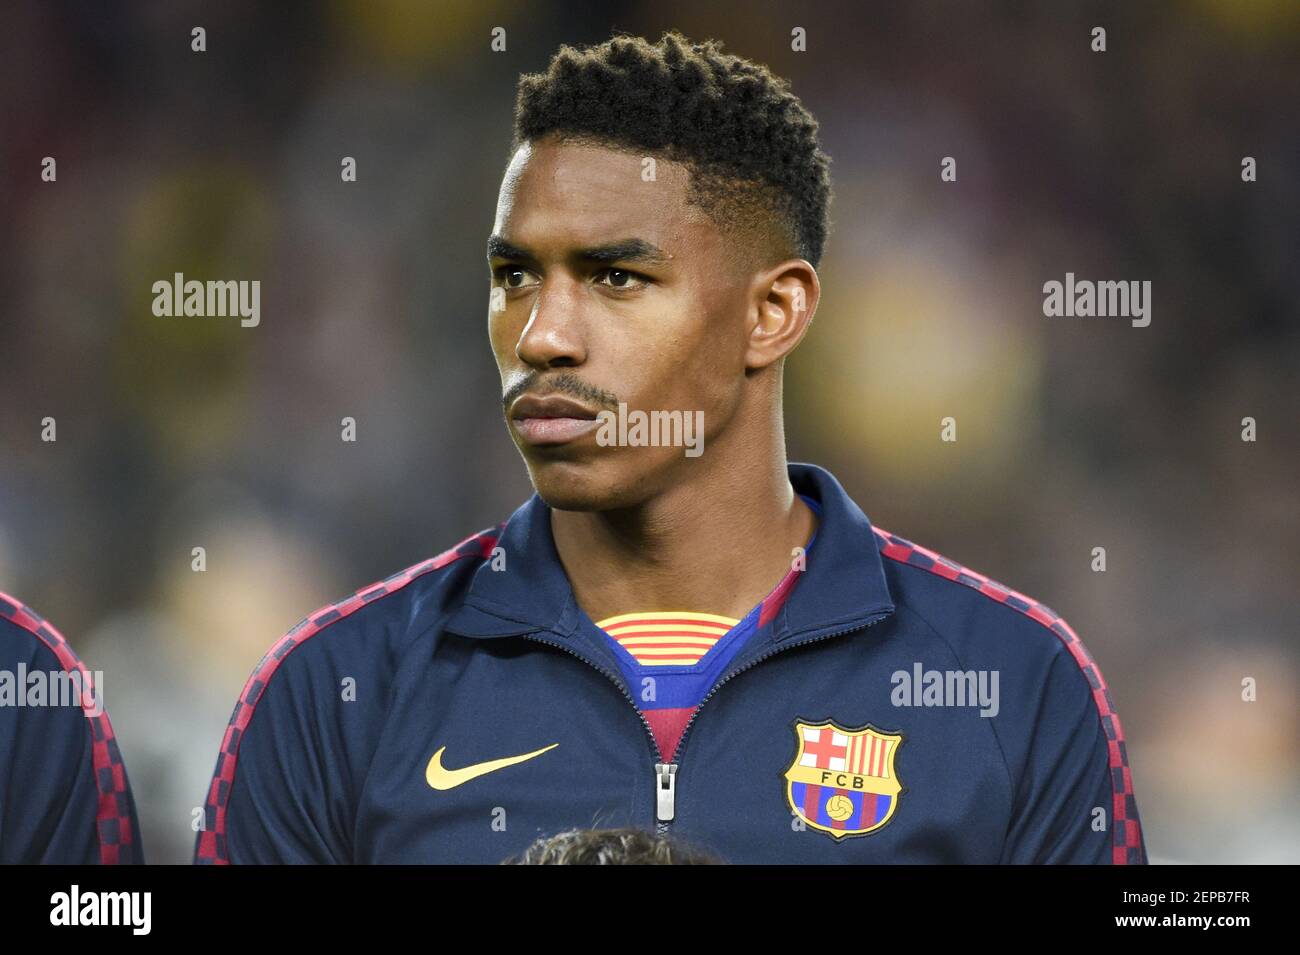 Junior Firpo of Barcelona during the UEFA Champions League Group F match between FC Barcelona and Borussia Dortmund at Camp Nou Stadium in Barcelona, Spain on November 27, 2019 (Photo by Andrew Surma / SIPA USA) Stock Photo